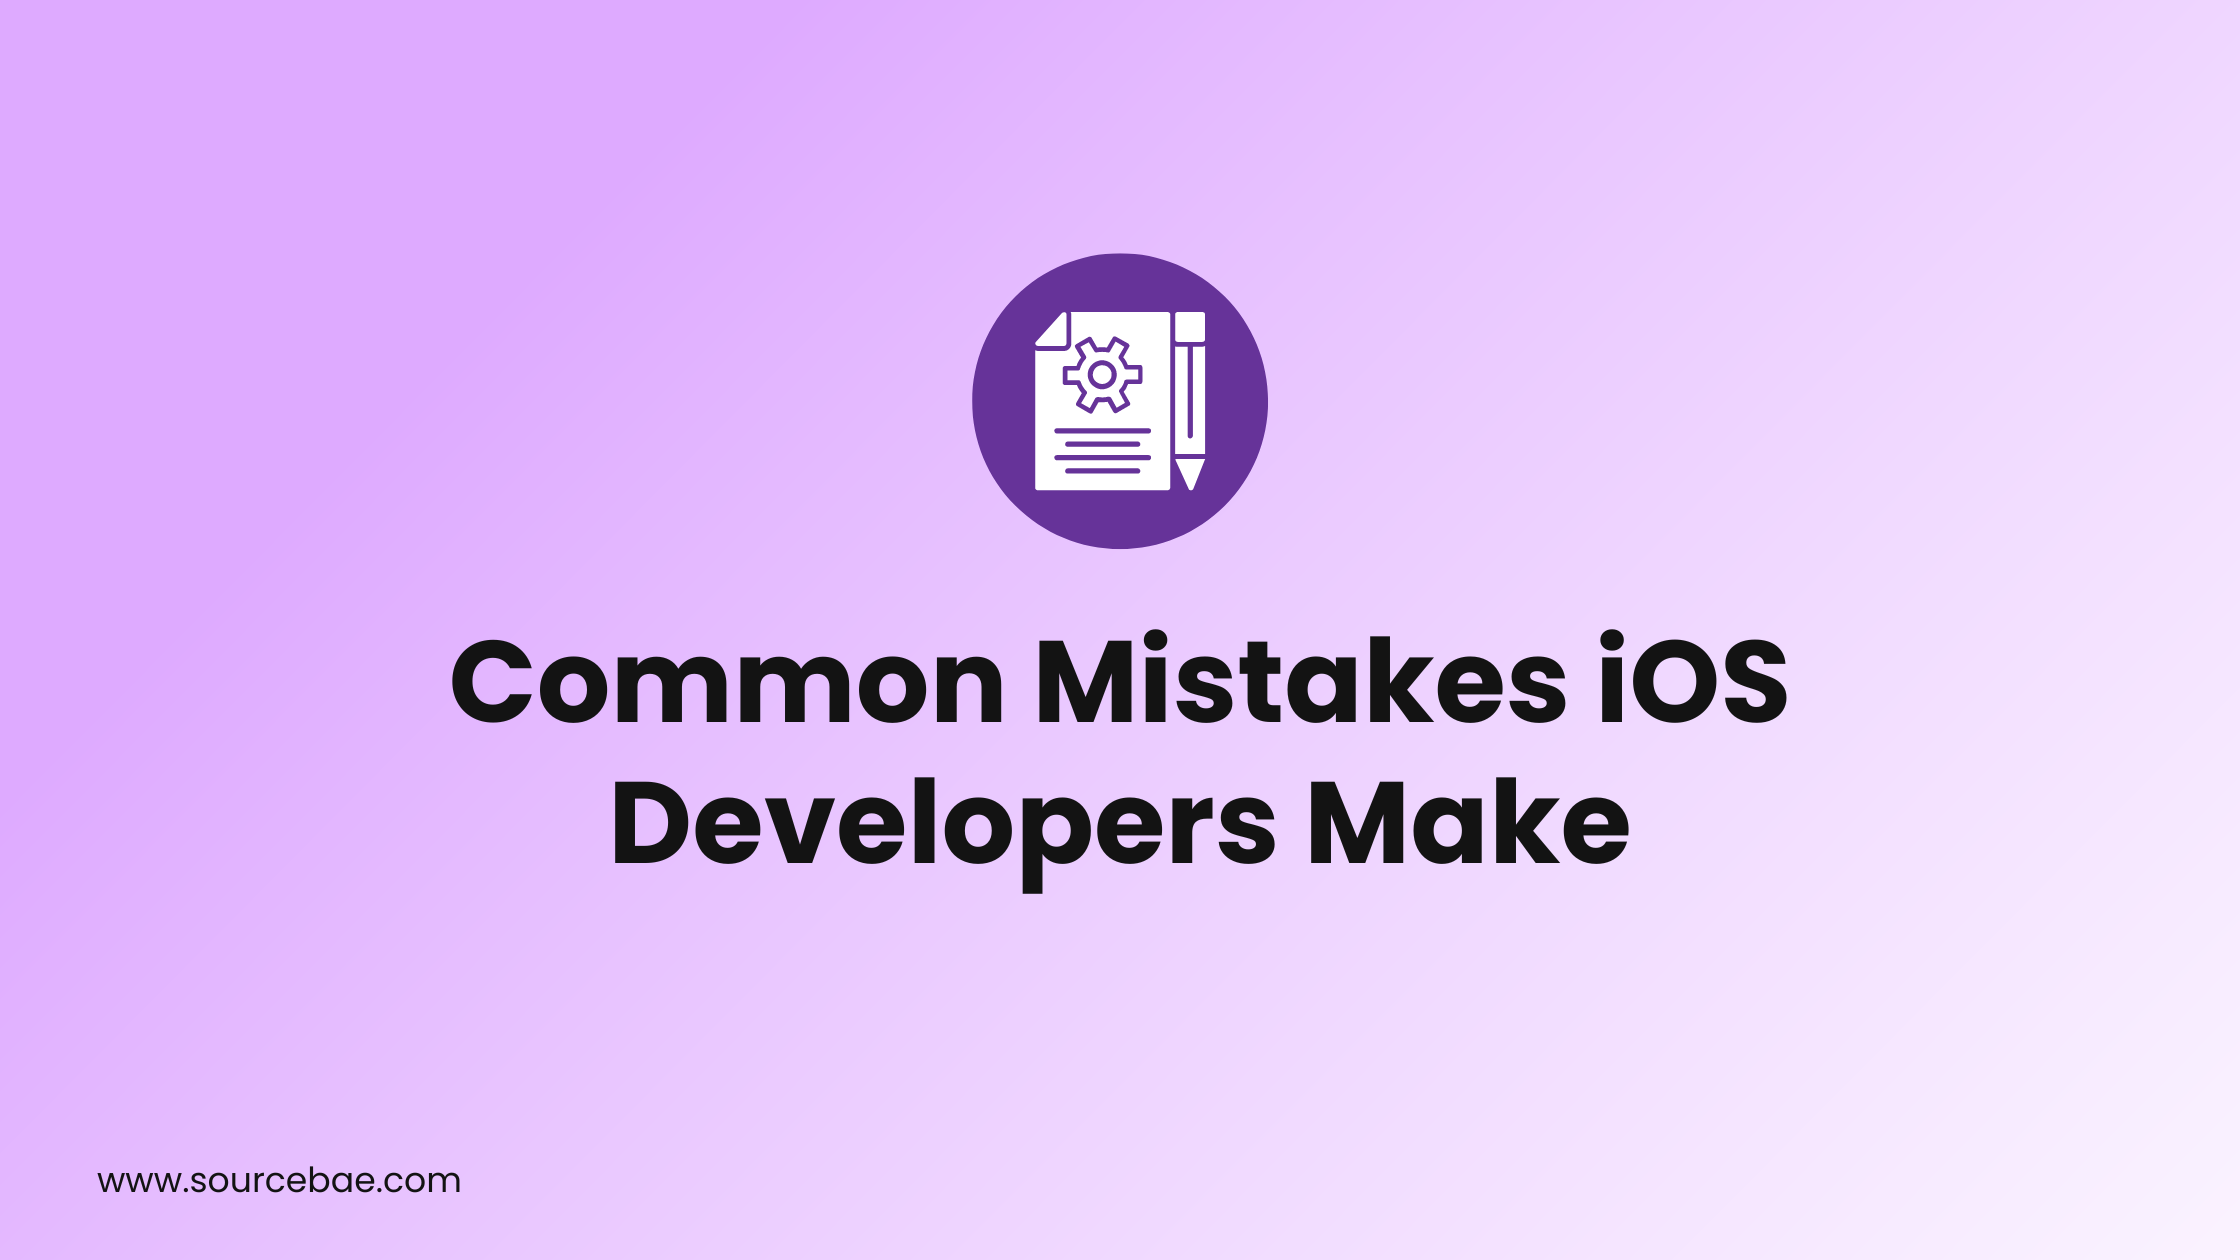 Common Mistakes iOS Developers Make